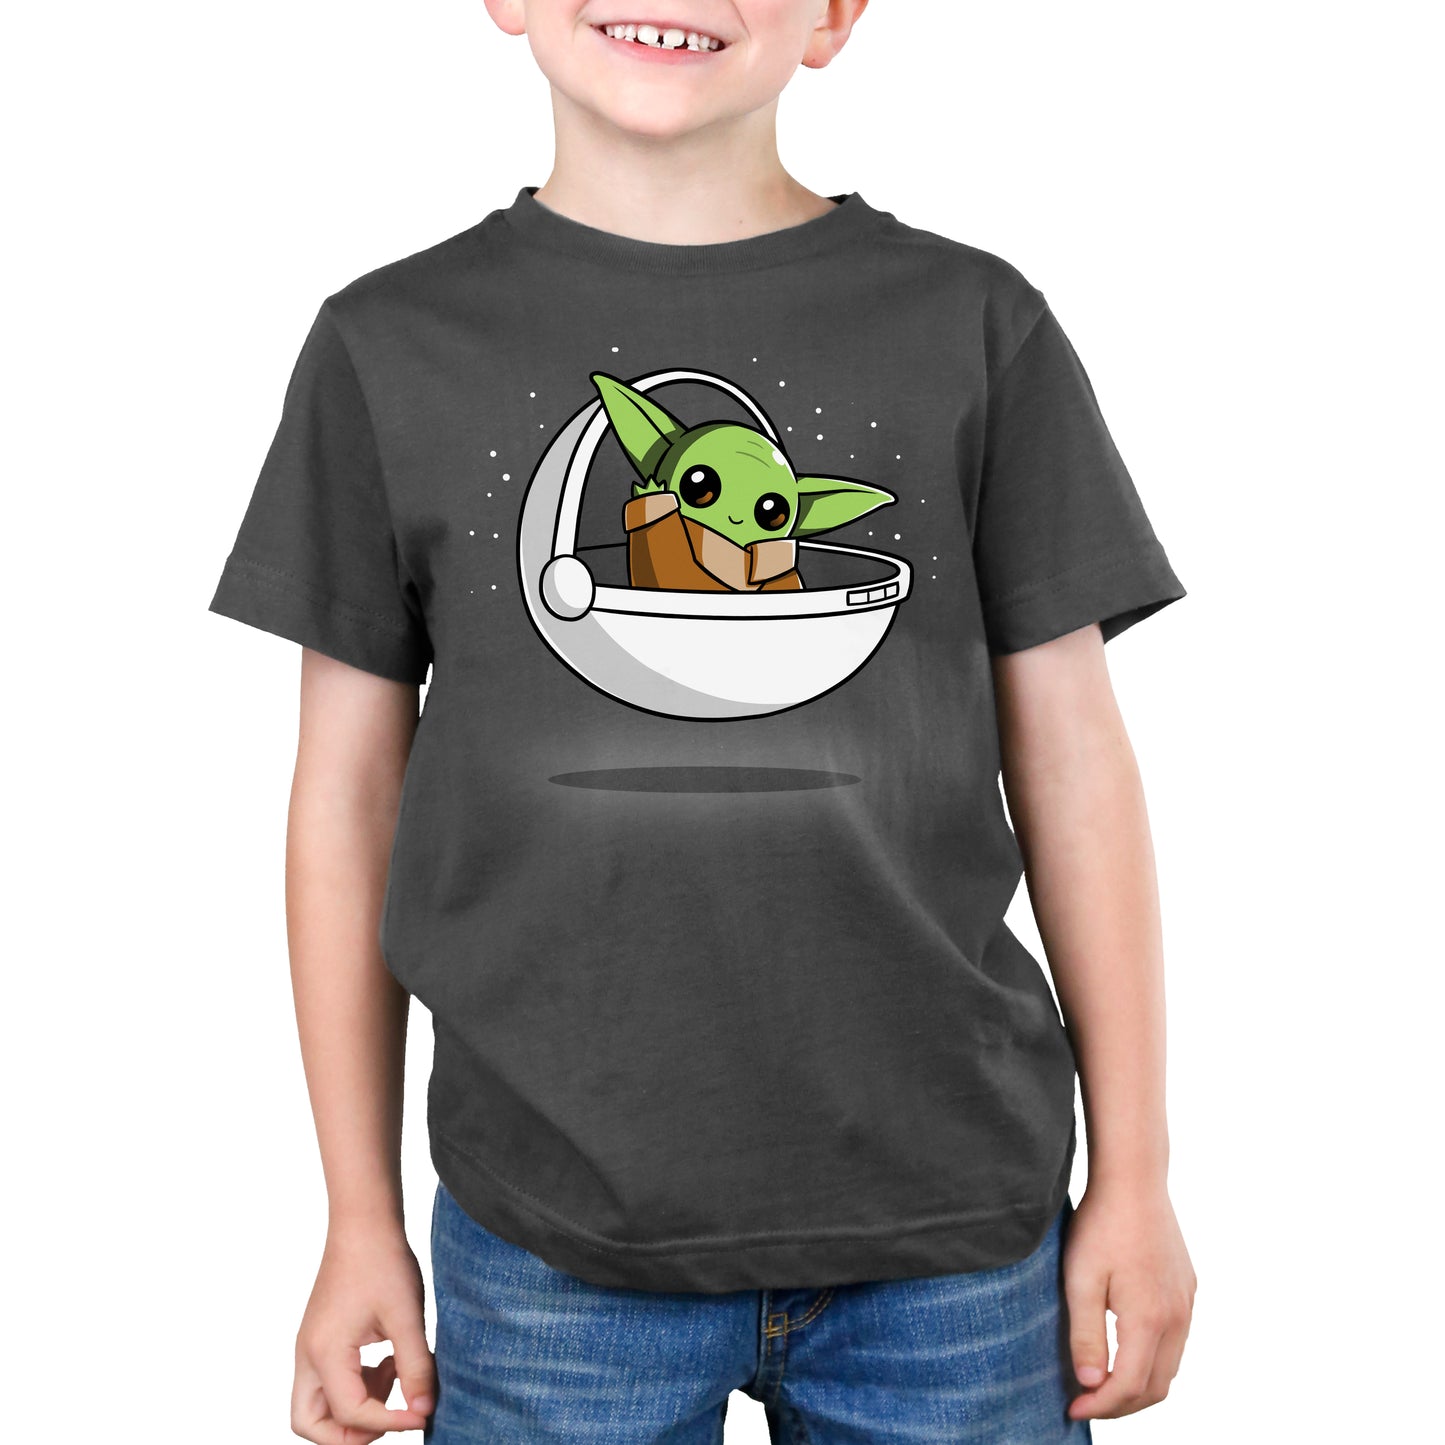 Officially licensed Star Wars Mandalorian "The Child" t-shirt featuring the beloved Grogu character.